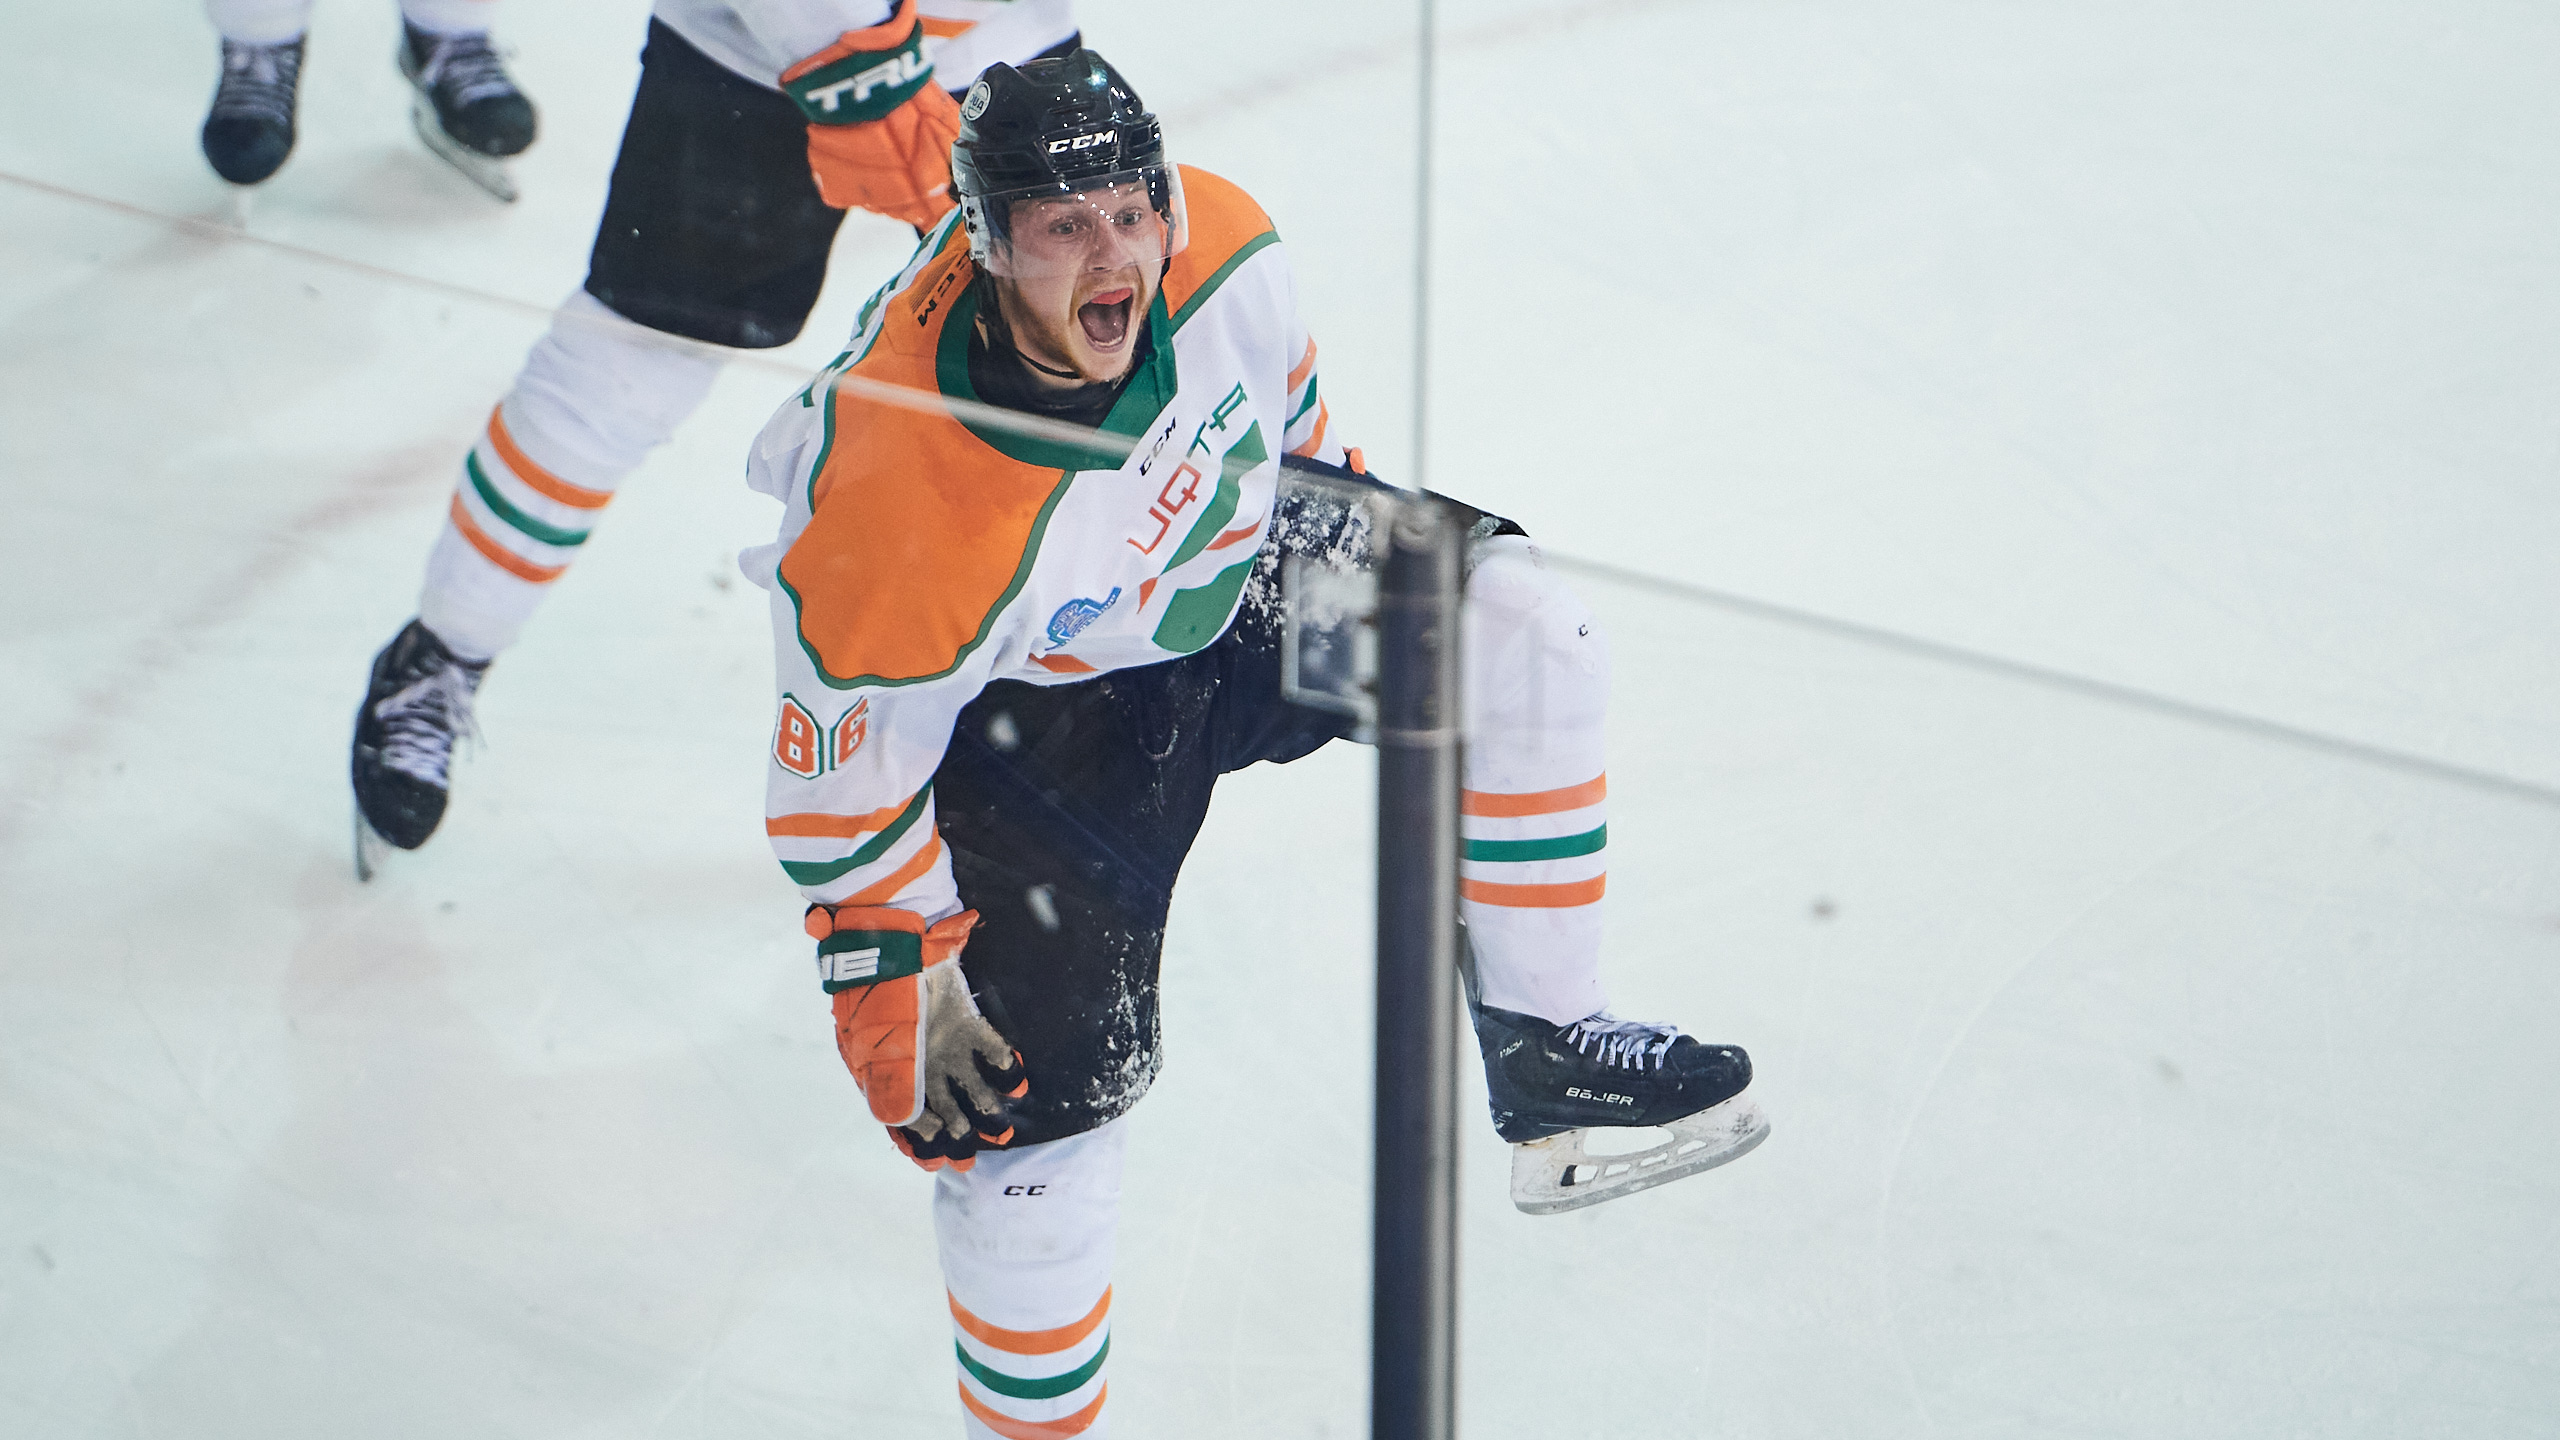 A UQTR player celebrates a goal by yelling